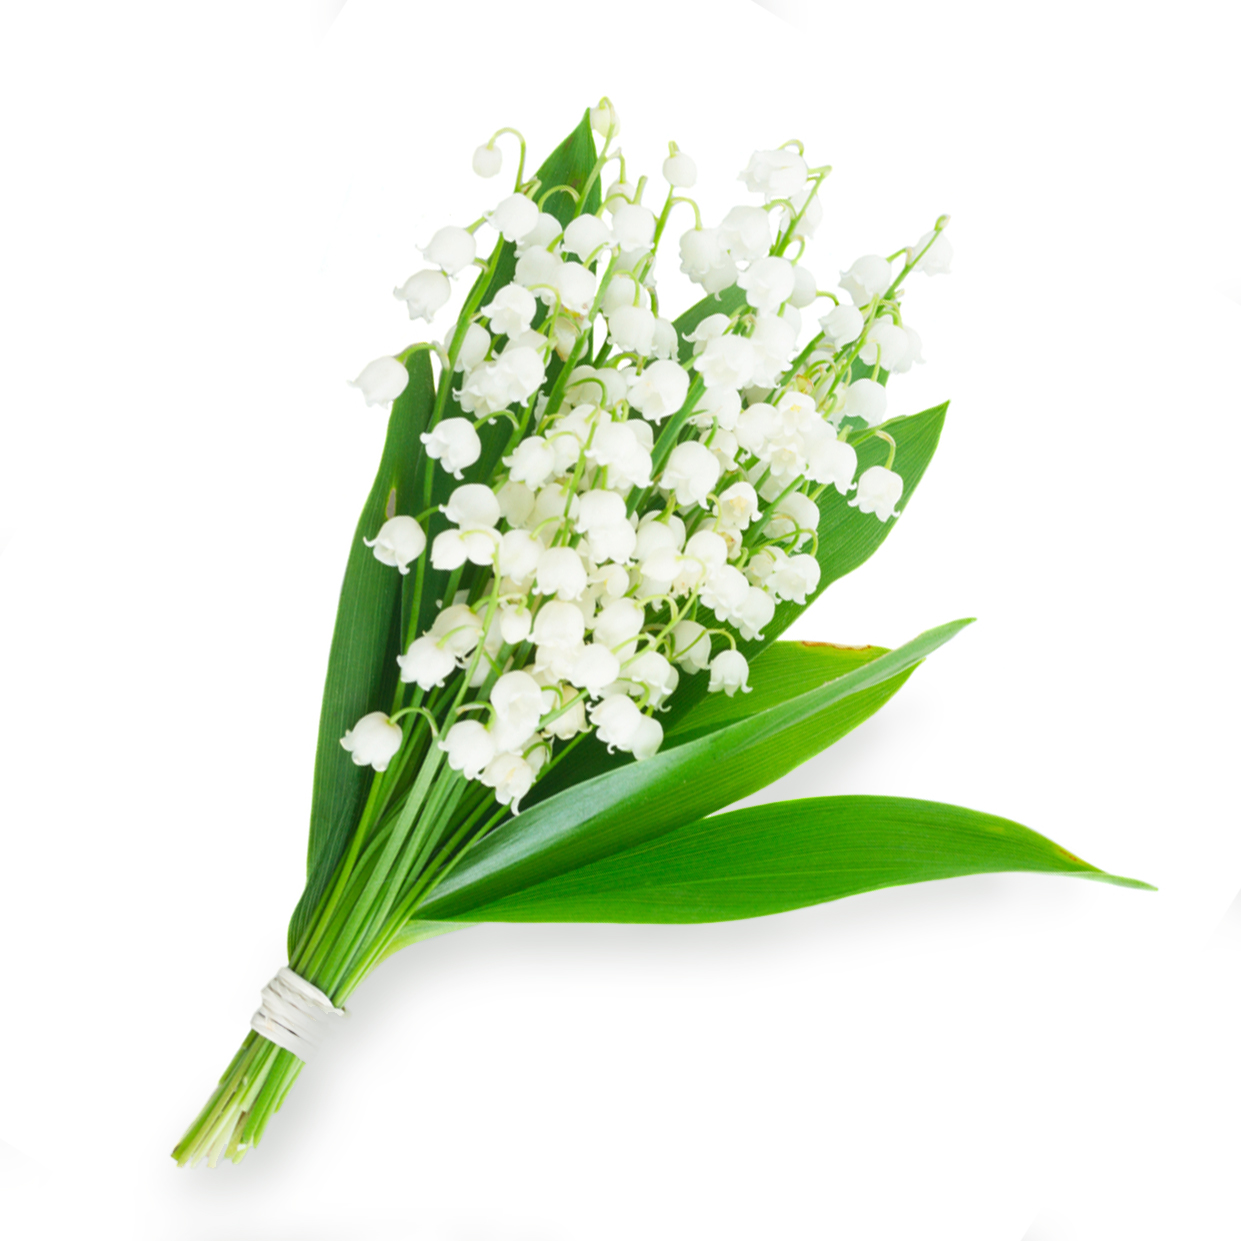 LILY OF THE VALLEY - sent on August 11th, 2022